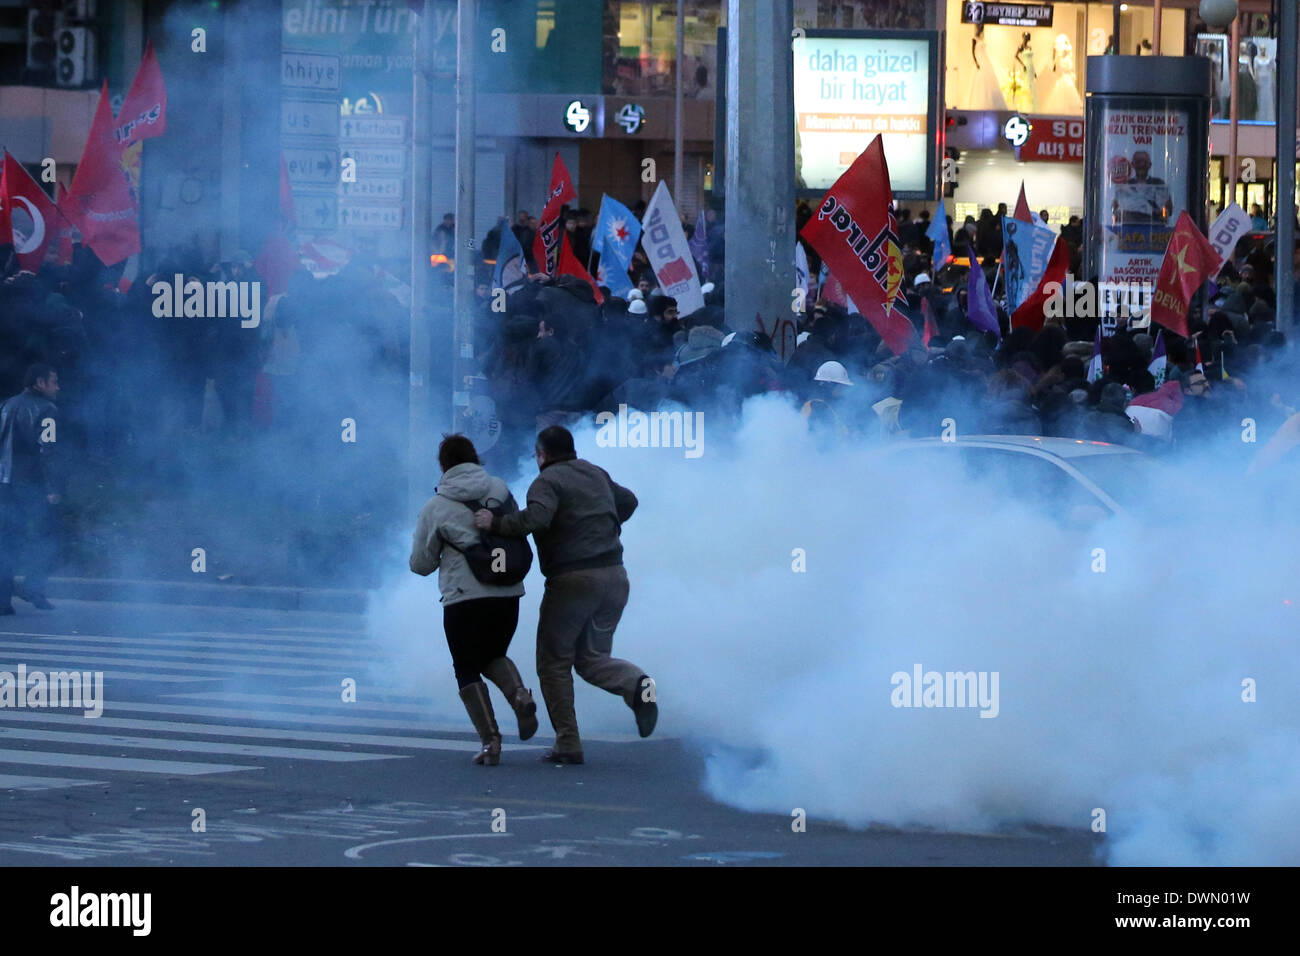 Ankara, Turkey. 11th Mar, 2014. Turkish people run away from tear gas during a protest in Ankara, capital of Turkey, March 11, 2014. Mass protests rallied on Tuesday in several cities in Turkey following the death of 15-year-old Berkin Elvan, who had been in coma for 269 days due to a head injury by a tear gas canister during the Gezi Park protests in last June. Credit:  Mustafa Kaya/Xinhua/Alamy Live News Stock Photo